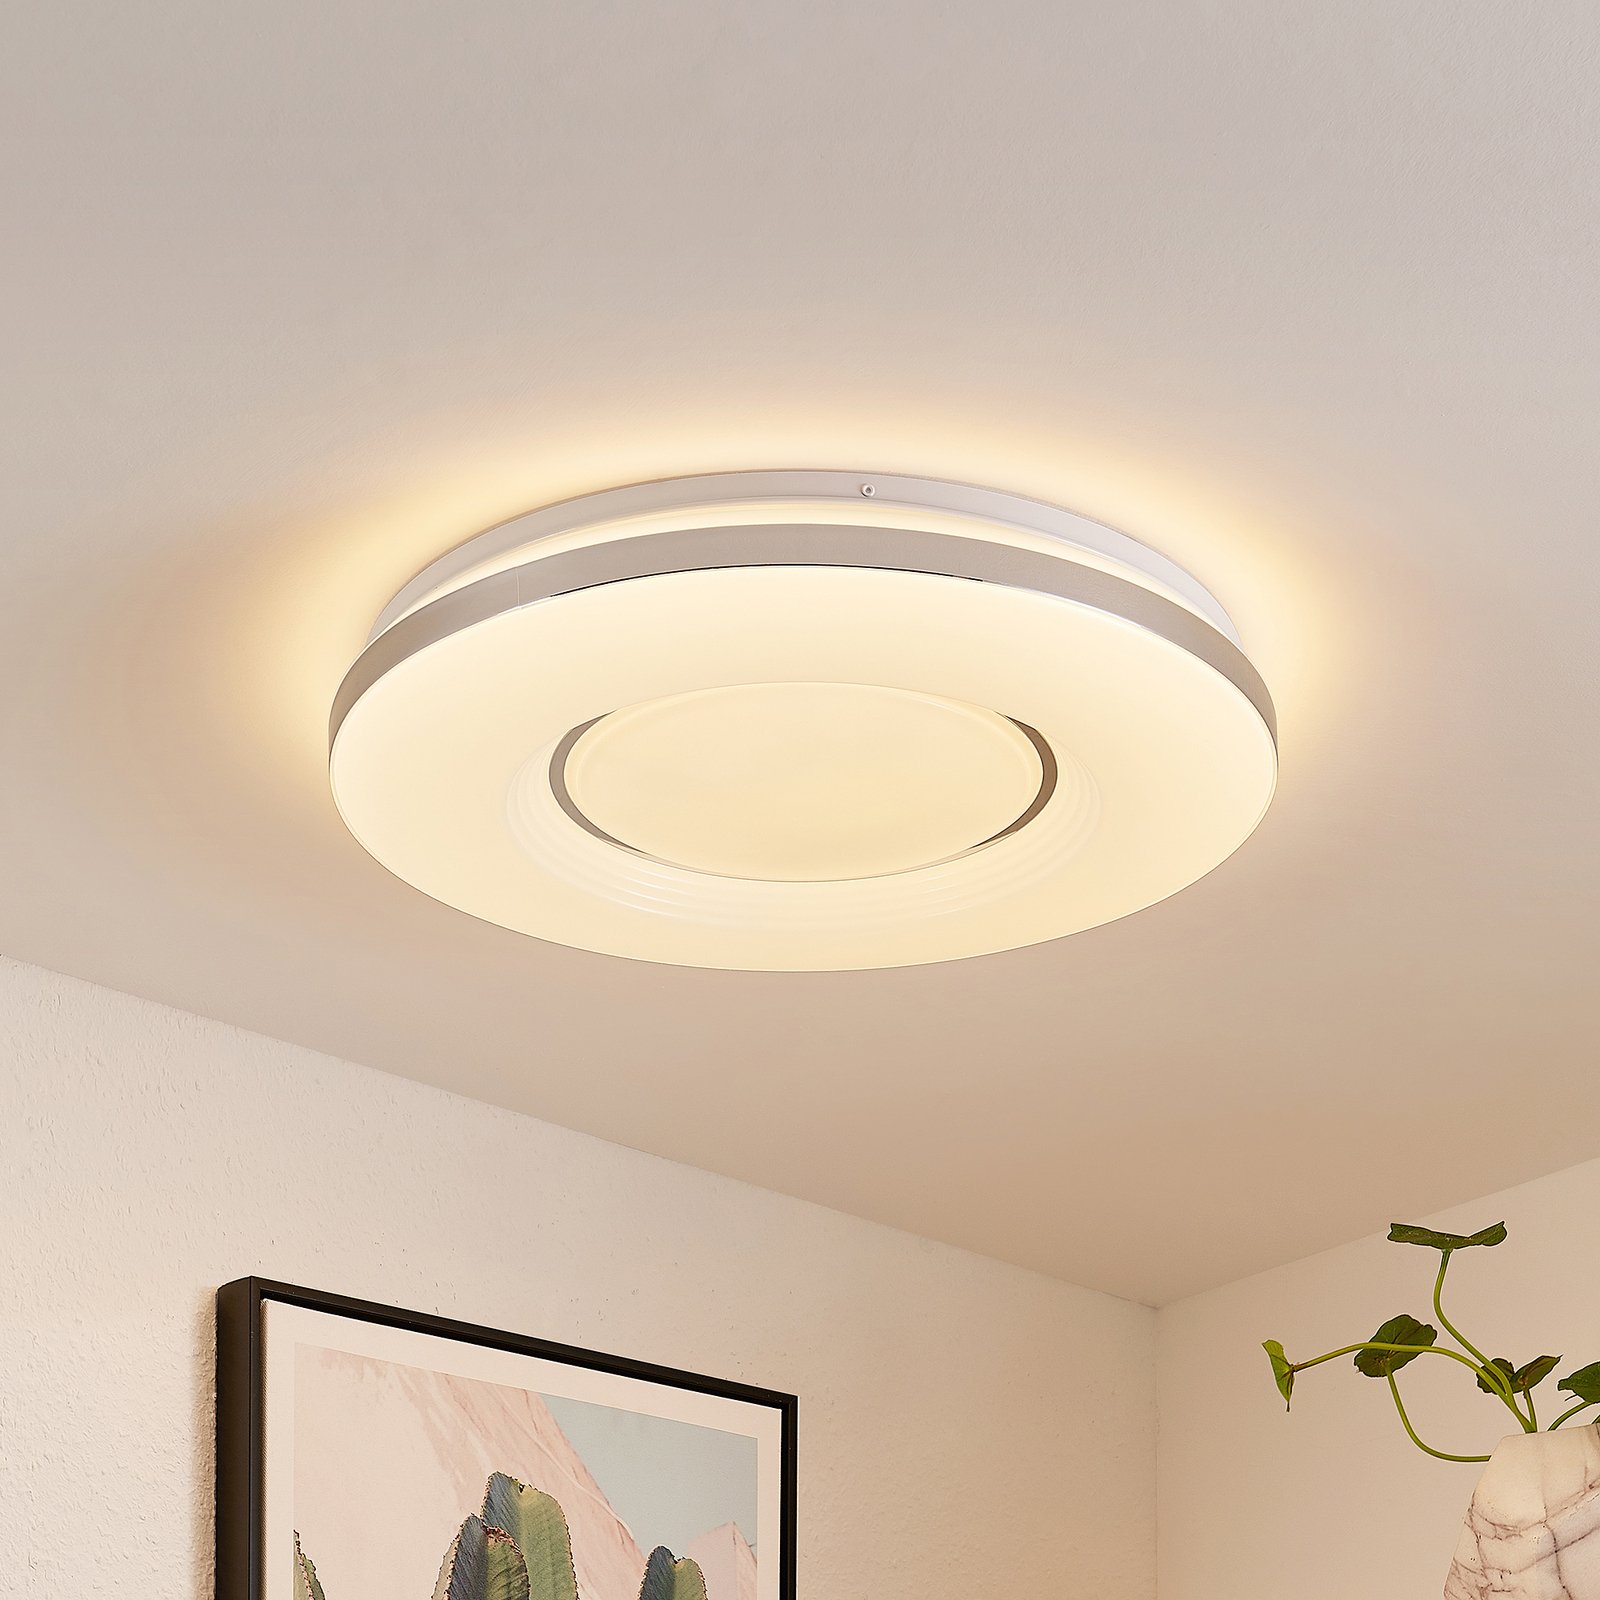 Lindby Robini LED-Deckenleuchte, CCT, dimmbar